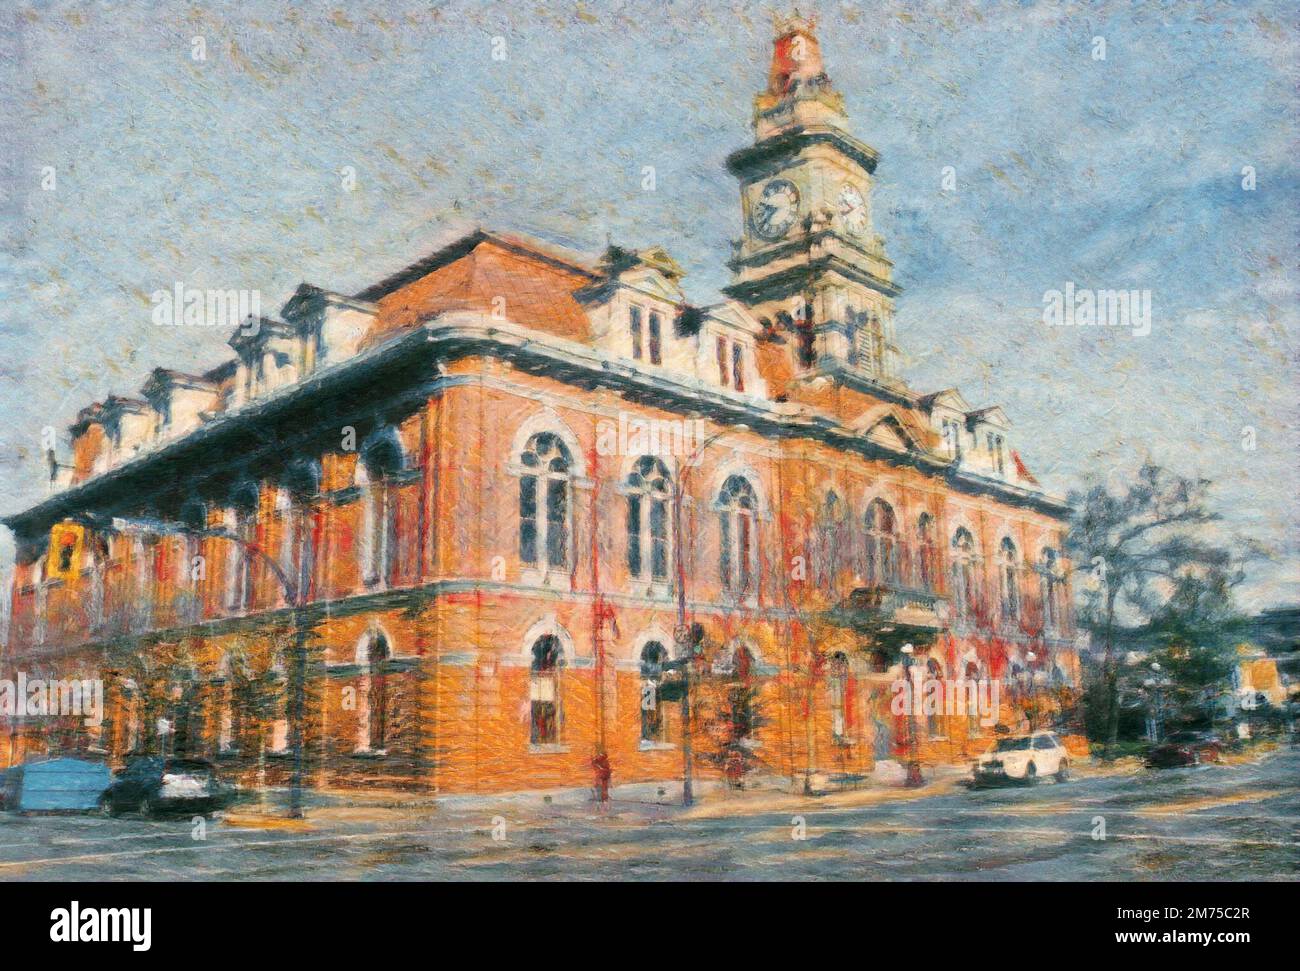 Digital watercolor painting effect on photo of Victoria Canada City Hall Stock Photo